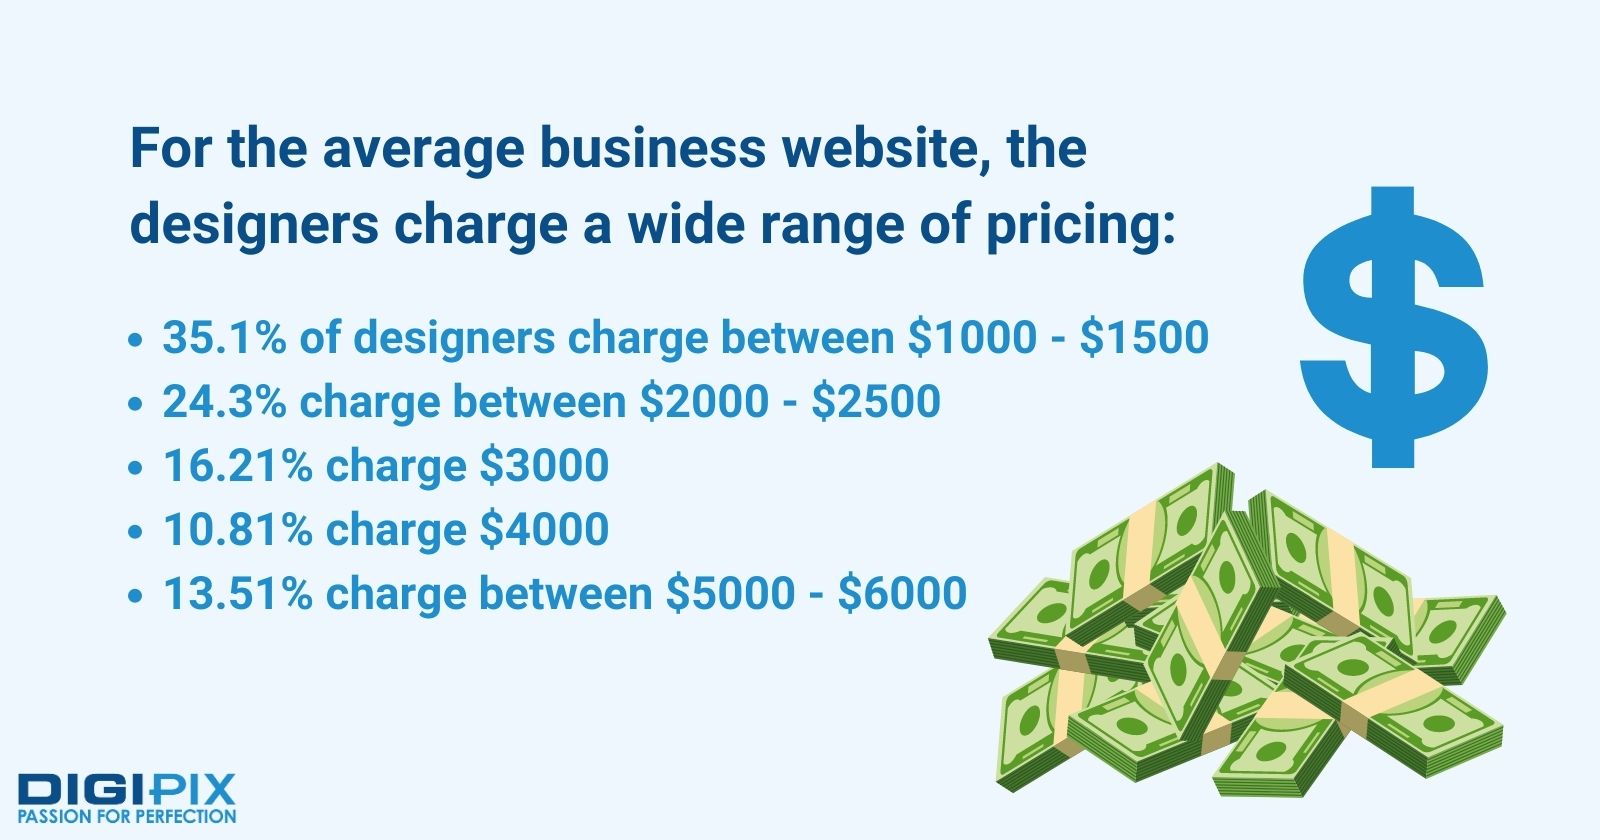 Price range for the website designs for average business